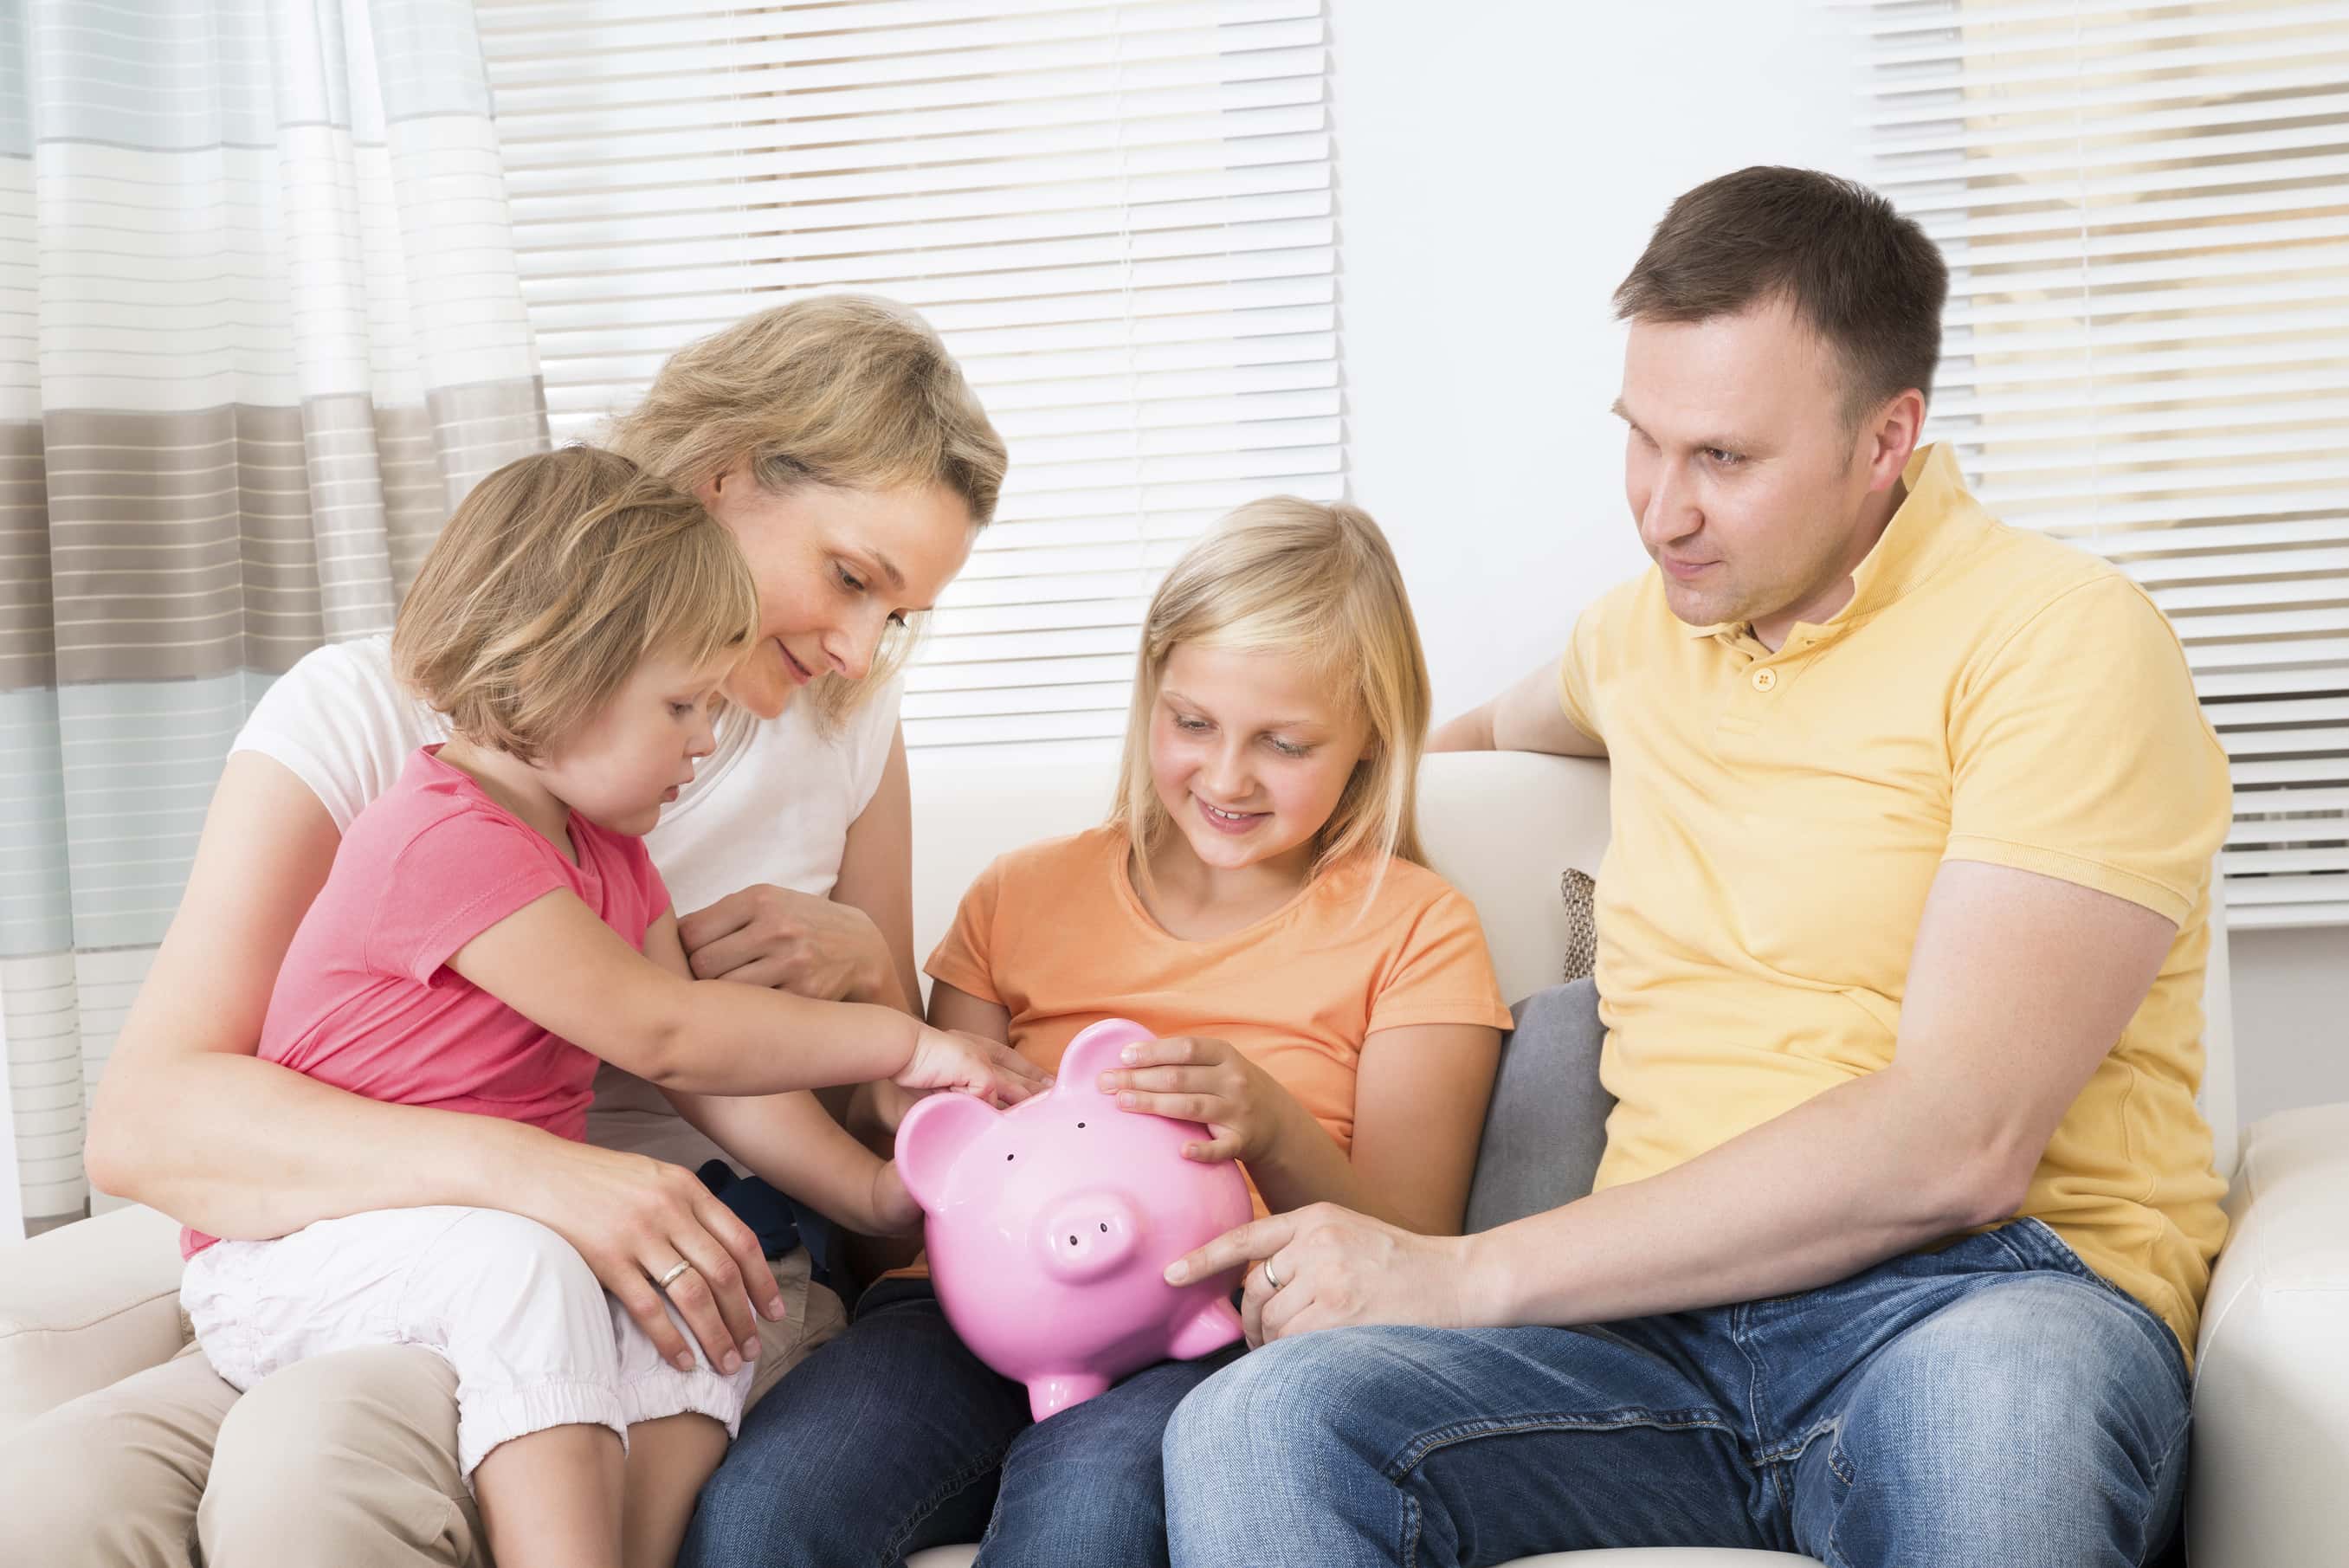 Remember to factor in parental subsidies at tax time